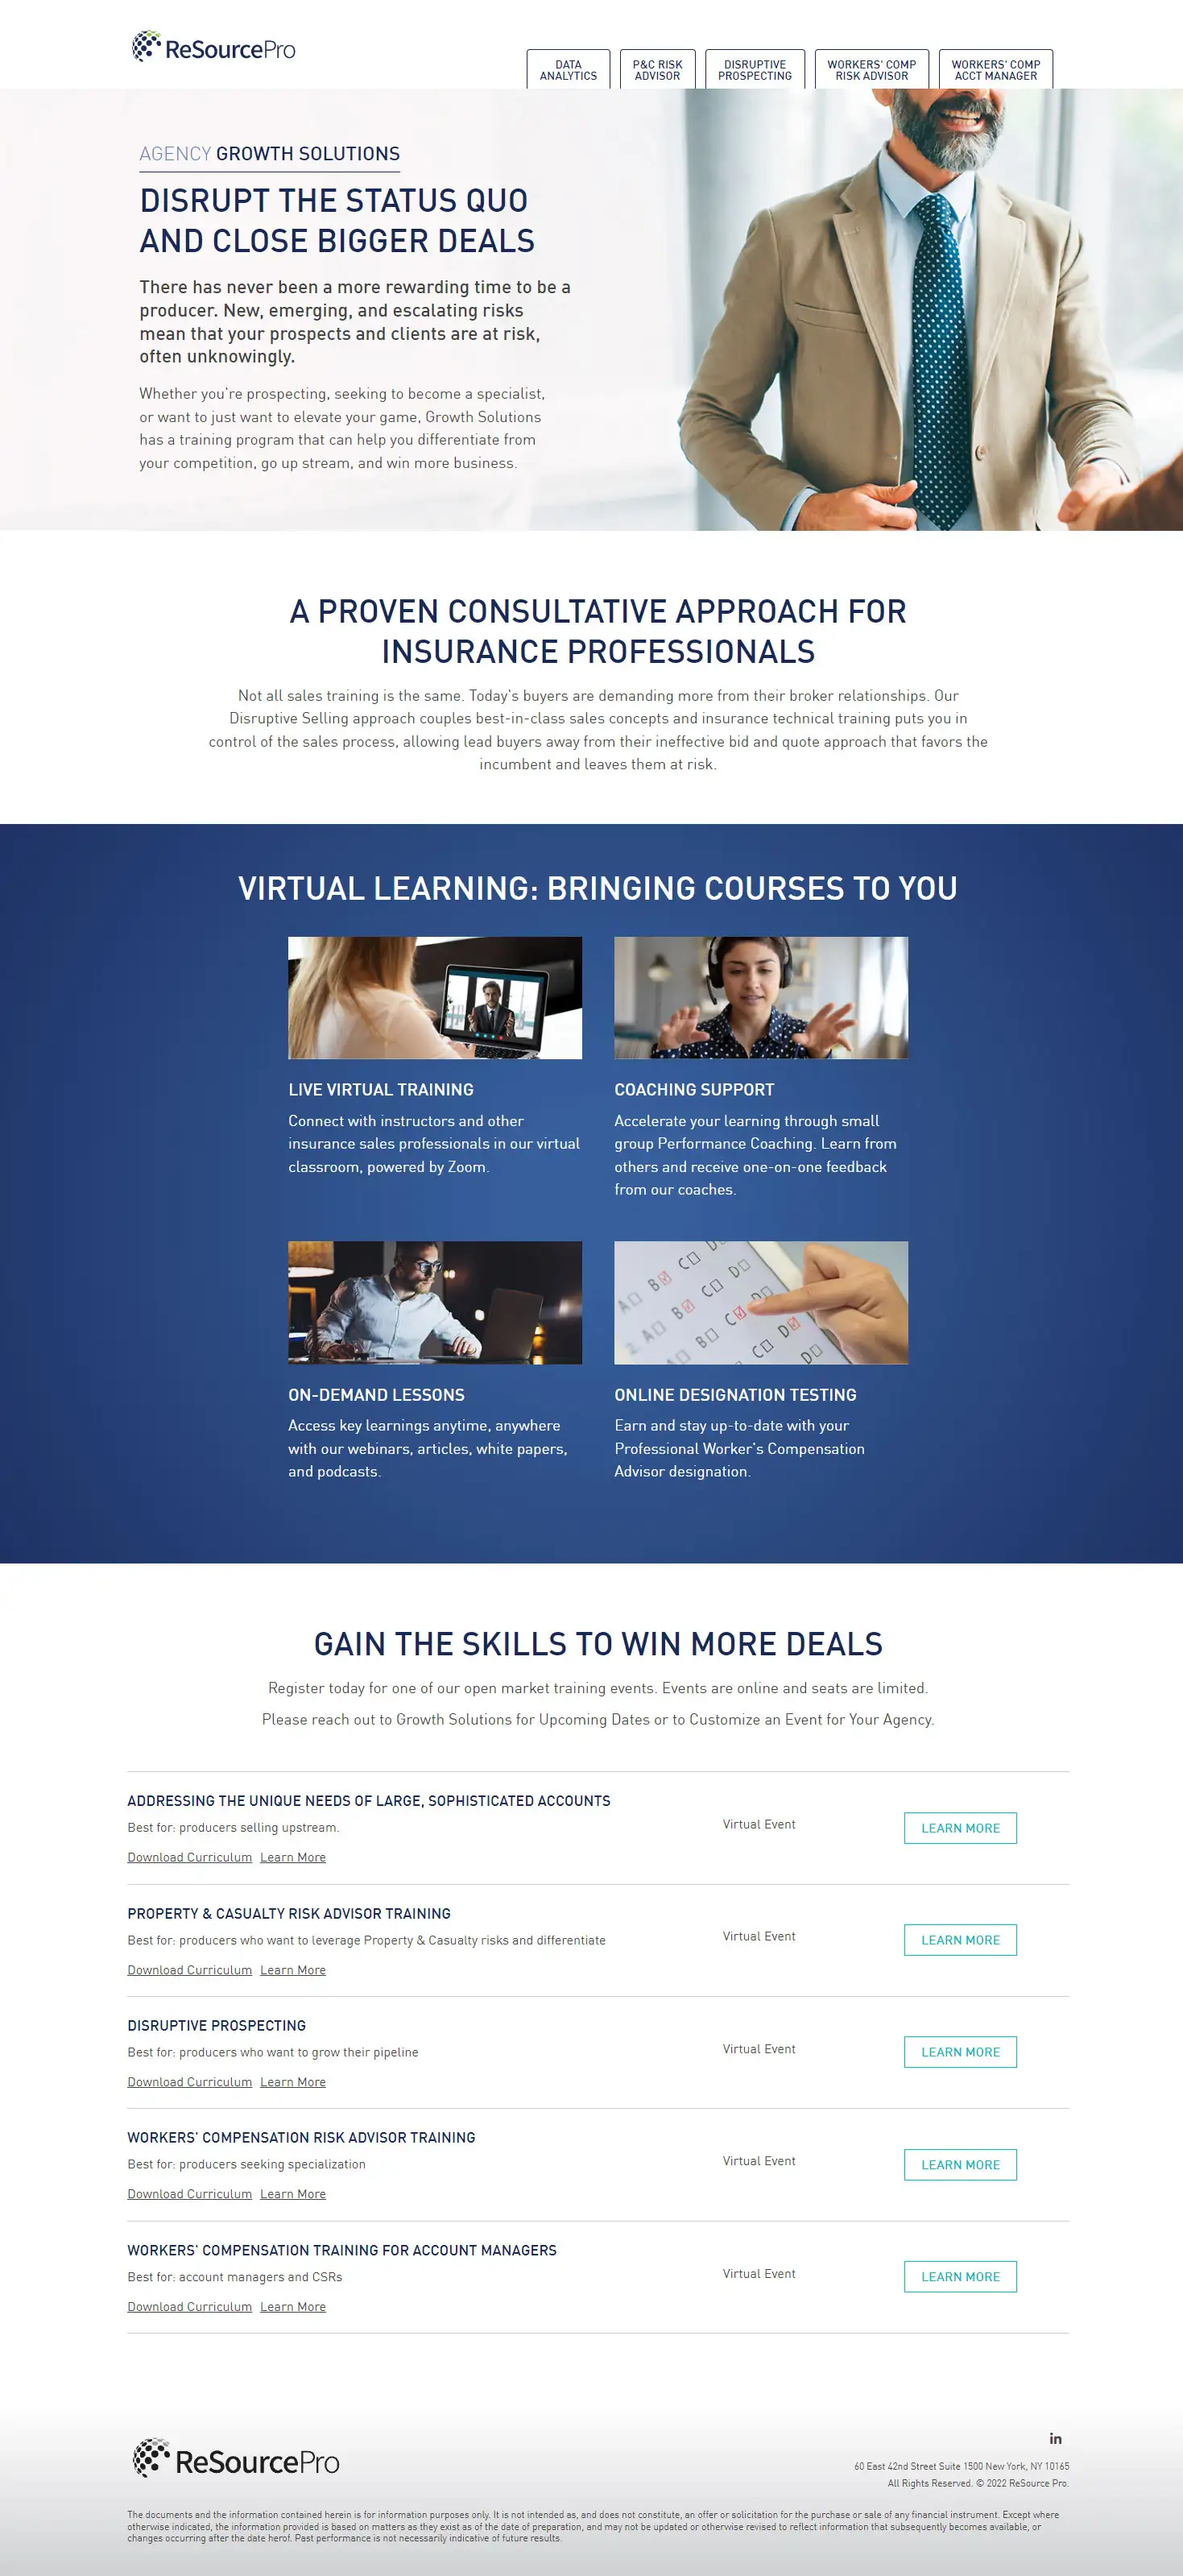 ReSource Pro - Marketo Landing Page / Microsite - Agency Growth Solutions